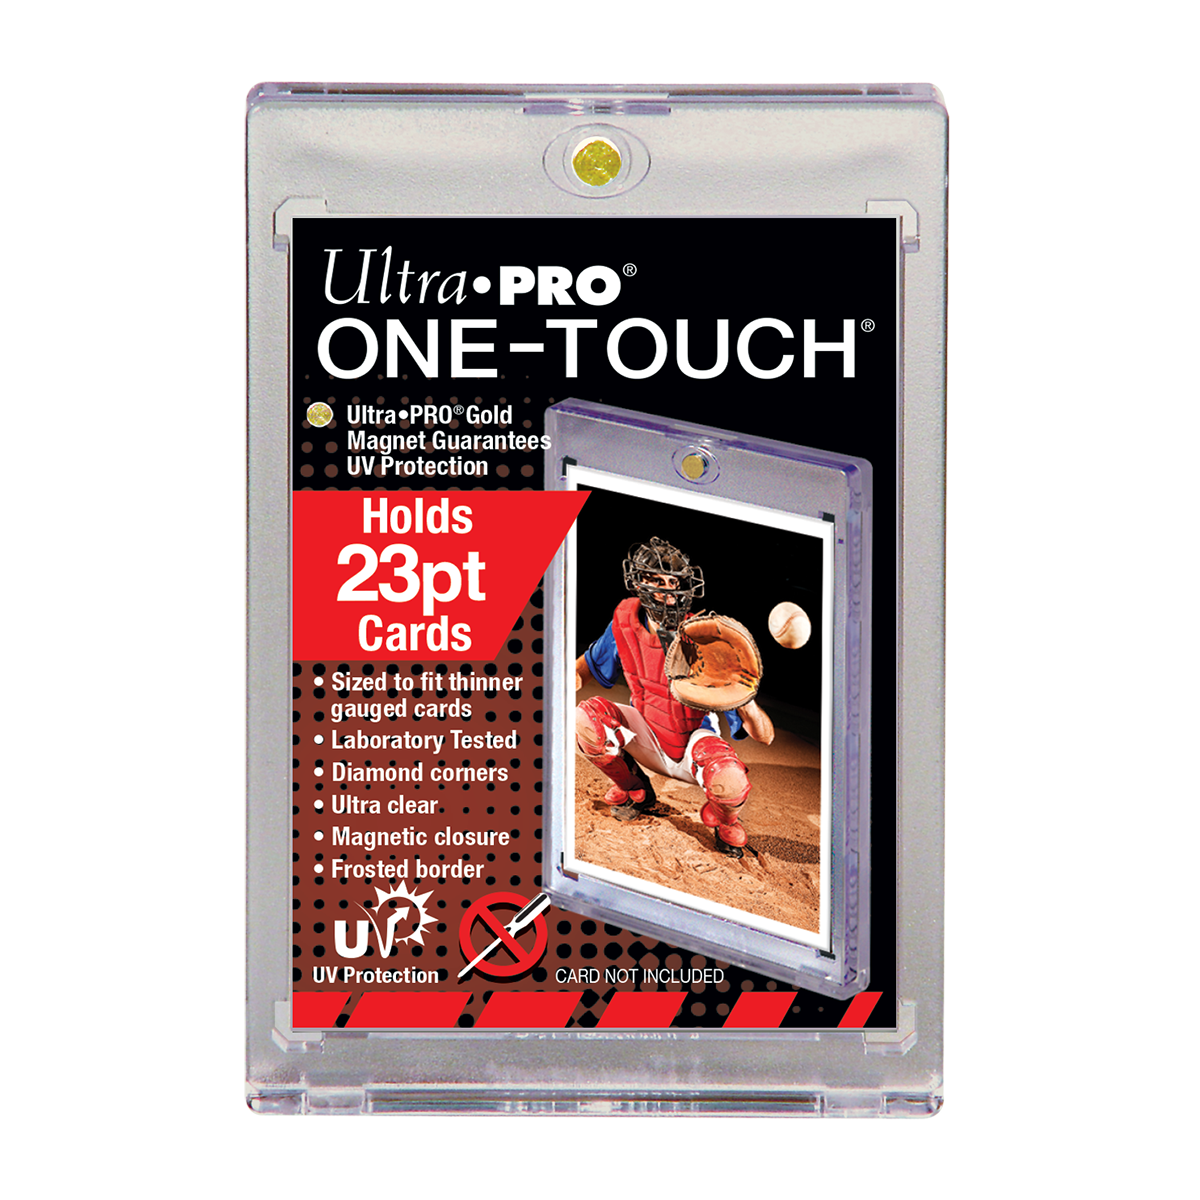 Ultra PRO 3 x 4 Clear Regular Top Loaders for Cards with Sleeves Bundle  Standard Size 200ct Baseball/Trading Card Sleeve Toploader Card Protectors